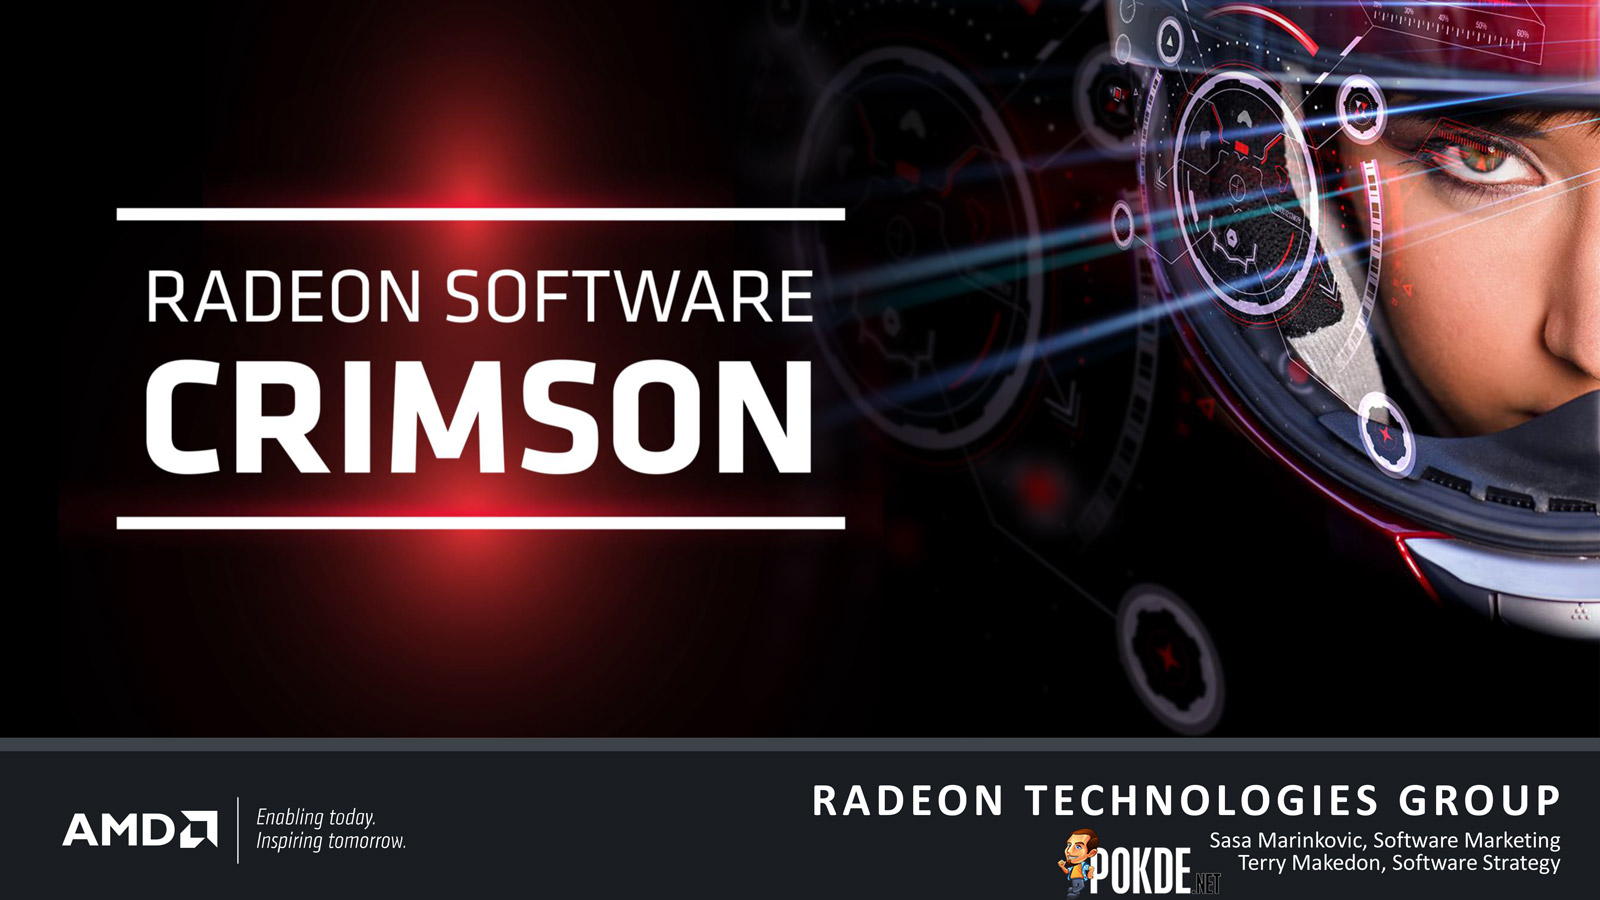 Radeon Technologies Group launched their first product today — Radeon Software Crimson Edition 33